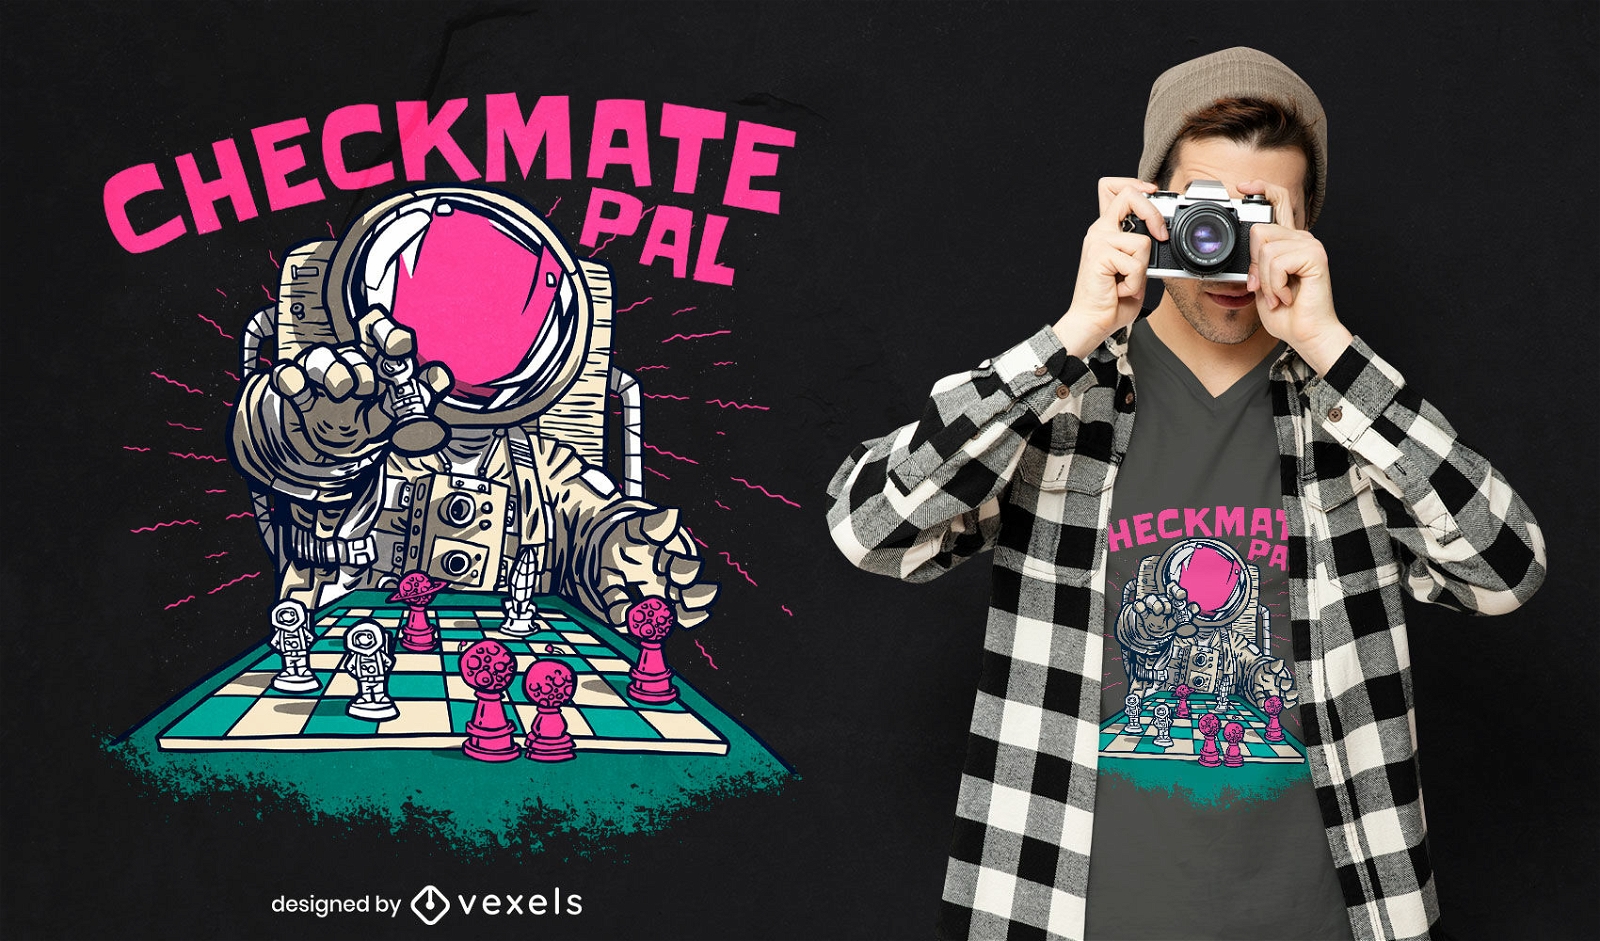 Checkmate astronaut chess t-shirt design